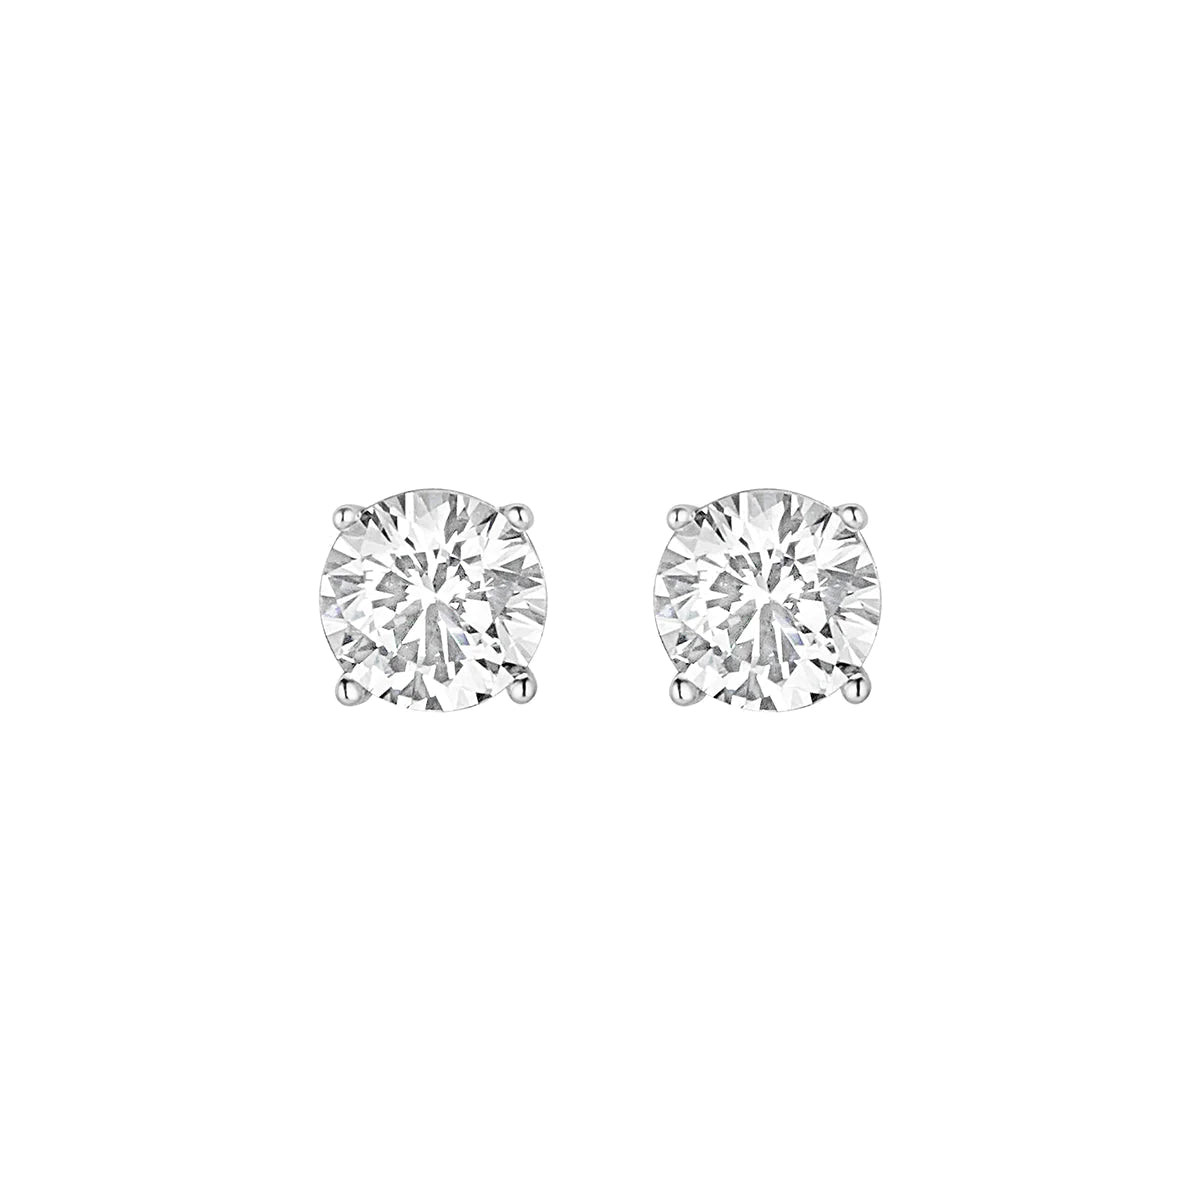 STERLING SILVER CZ SMALL SOLITAIRE STUD EARRINGS